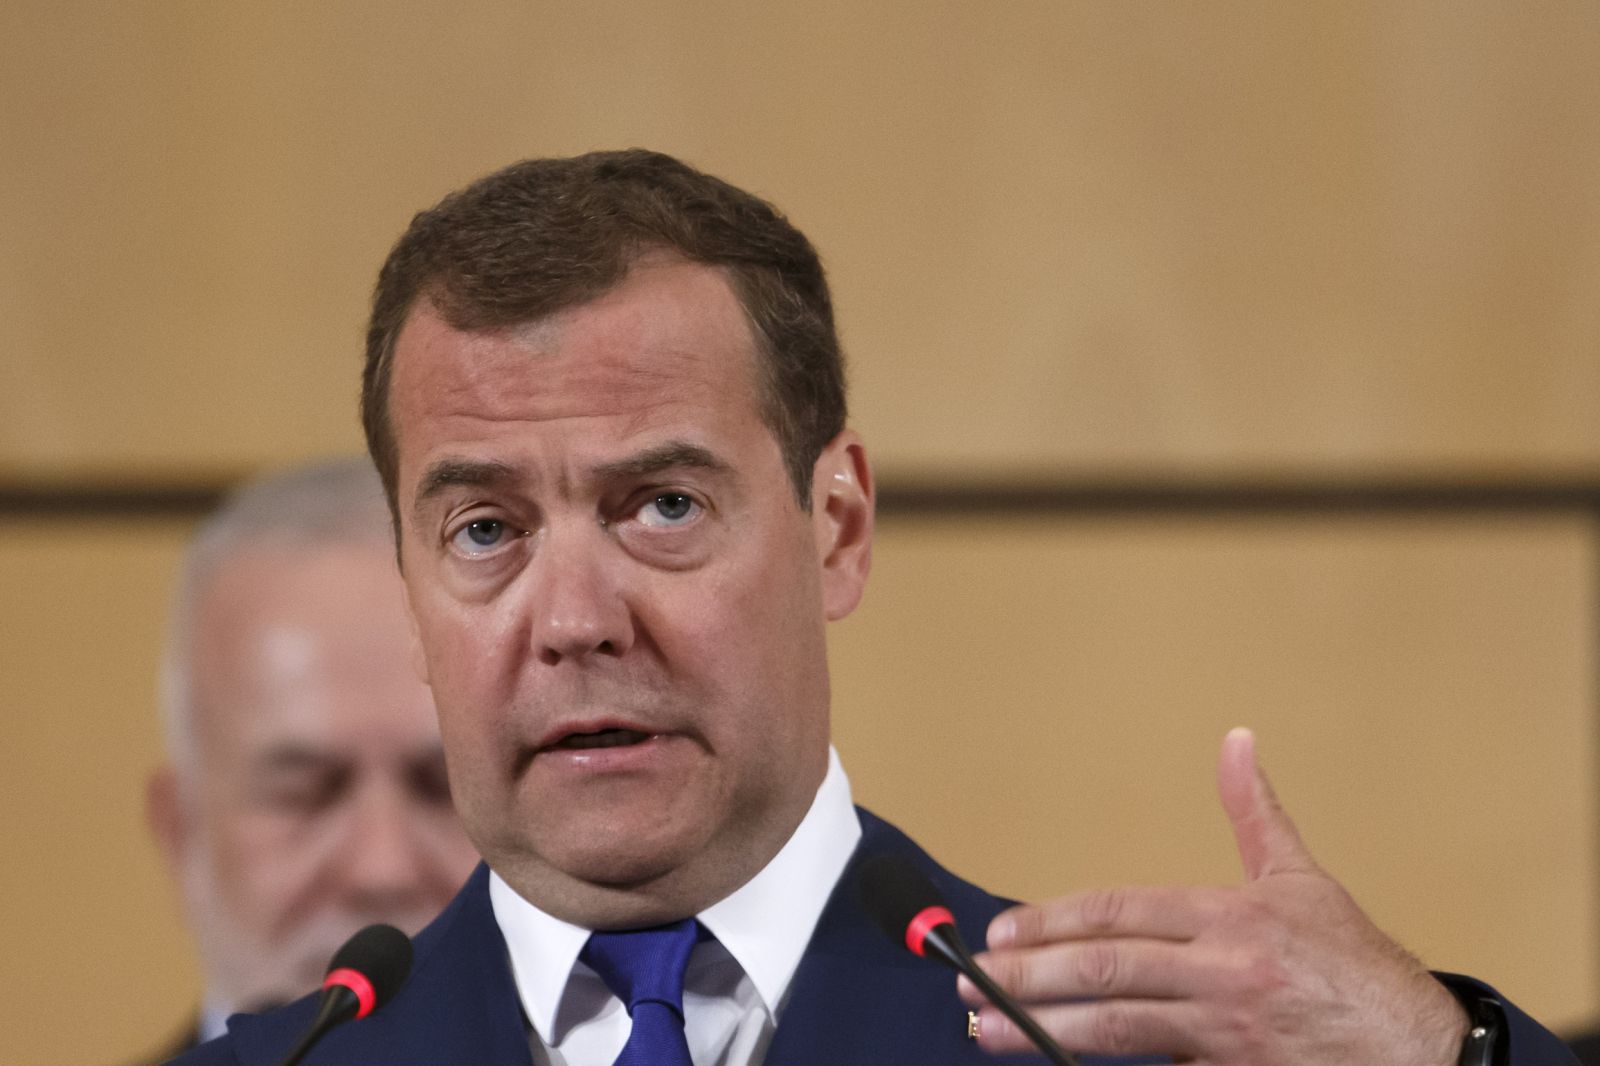 Russia's Prime Minister Dmitry Medvedev delivers his statement, during the 108th session of the International Labour Conference - ILO Centenary Session, at the European headquarters of the United Nations in Geneva, Switzerland, Tuesday, June 11, 2019. (Salvatore Di Nolfi/Keystone via AP)